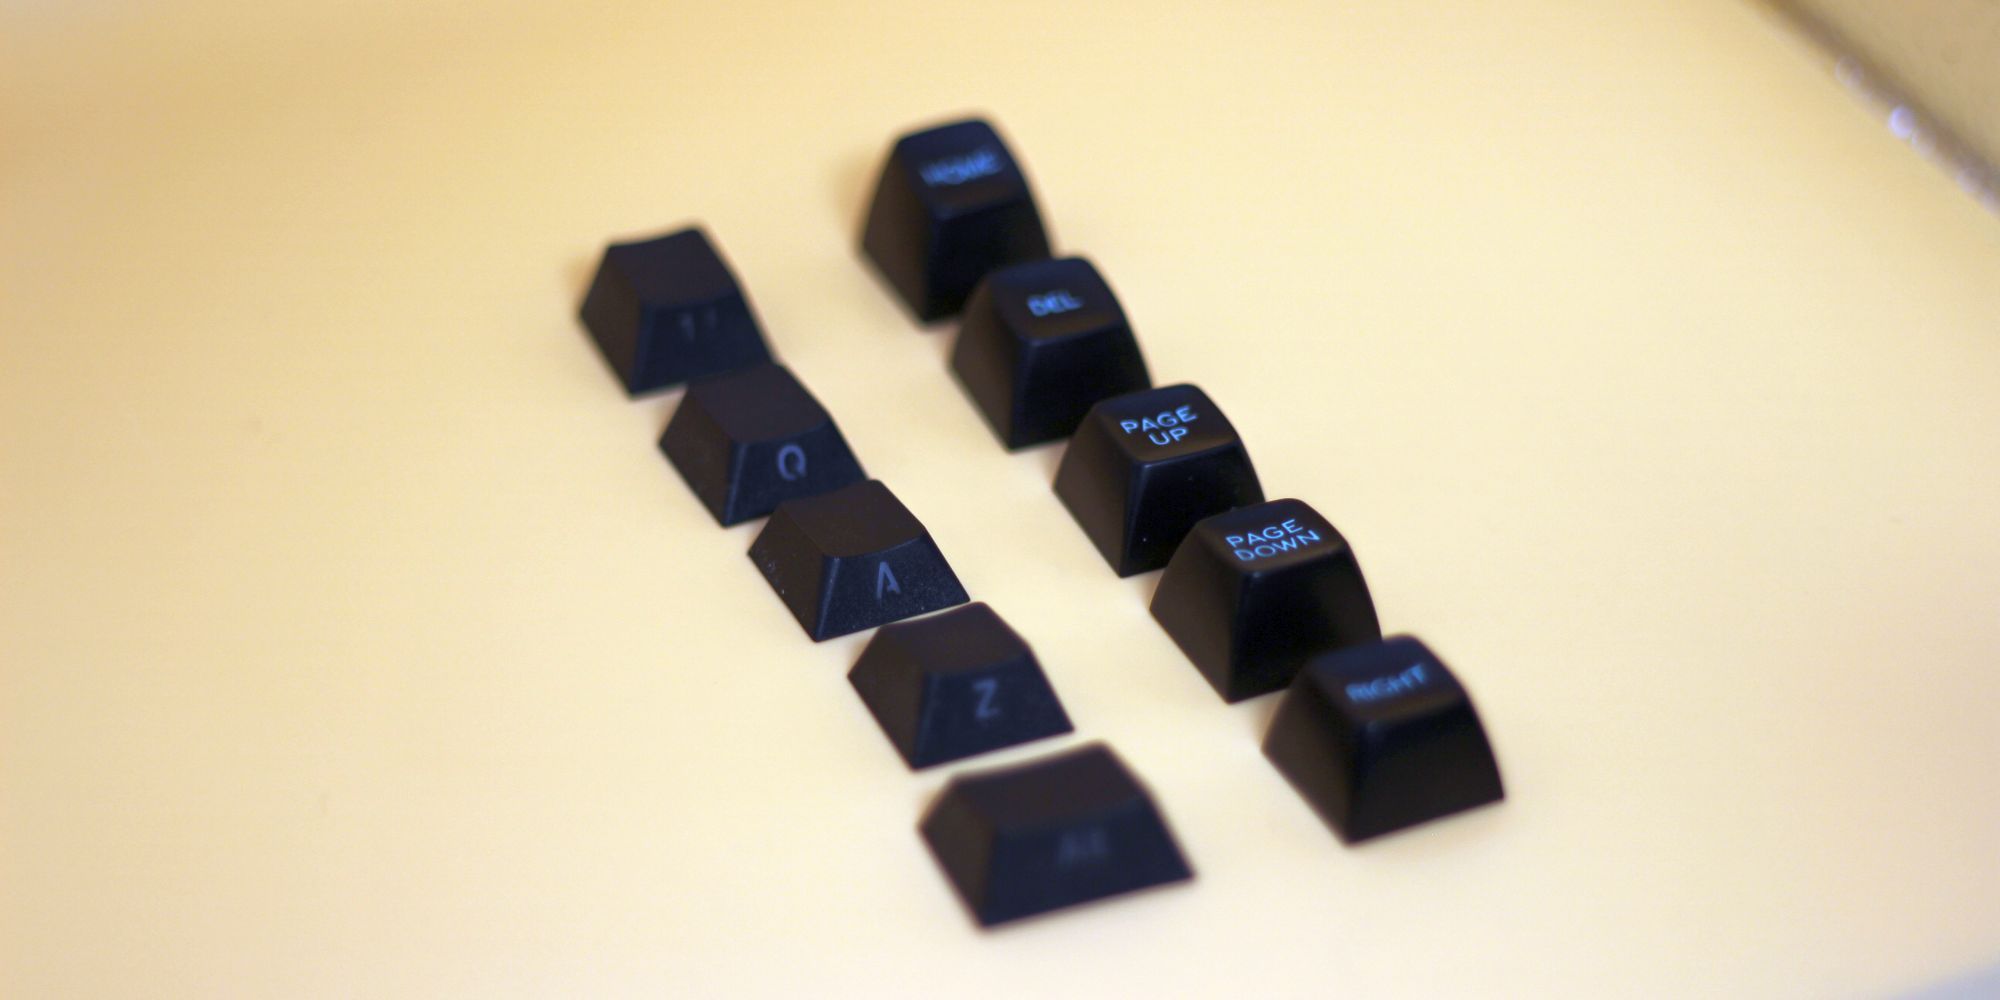 melgeek-mojo68-wireless-bluetooth-mechcanical-keyboard-review-keycaps-compared